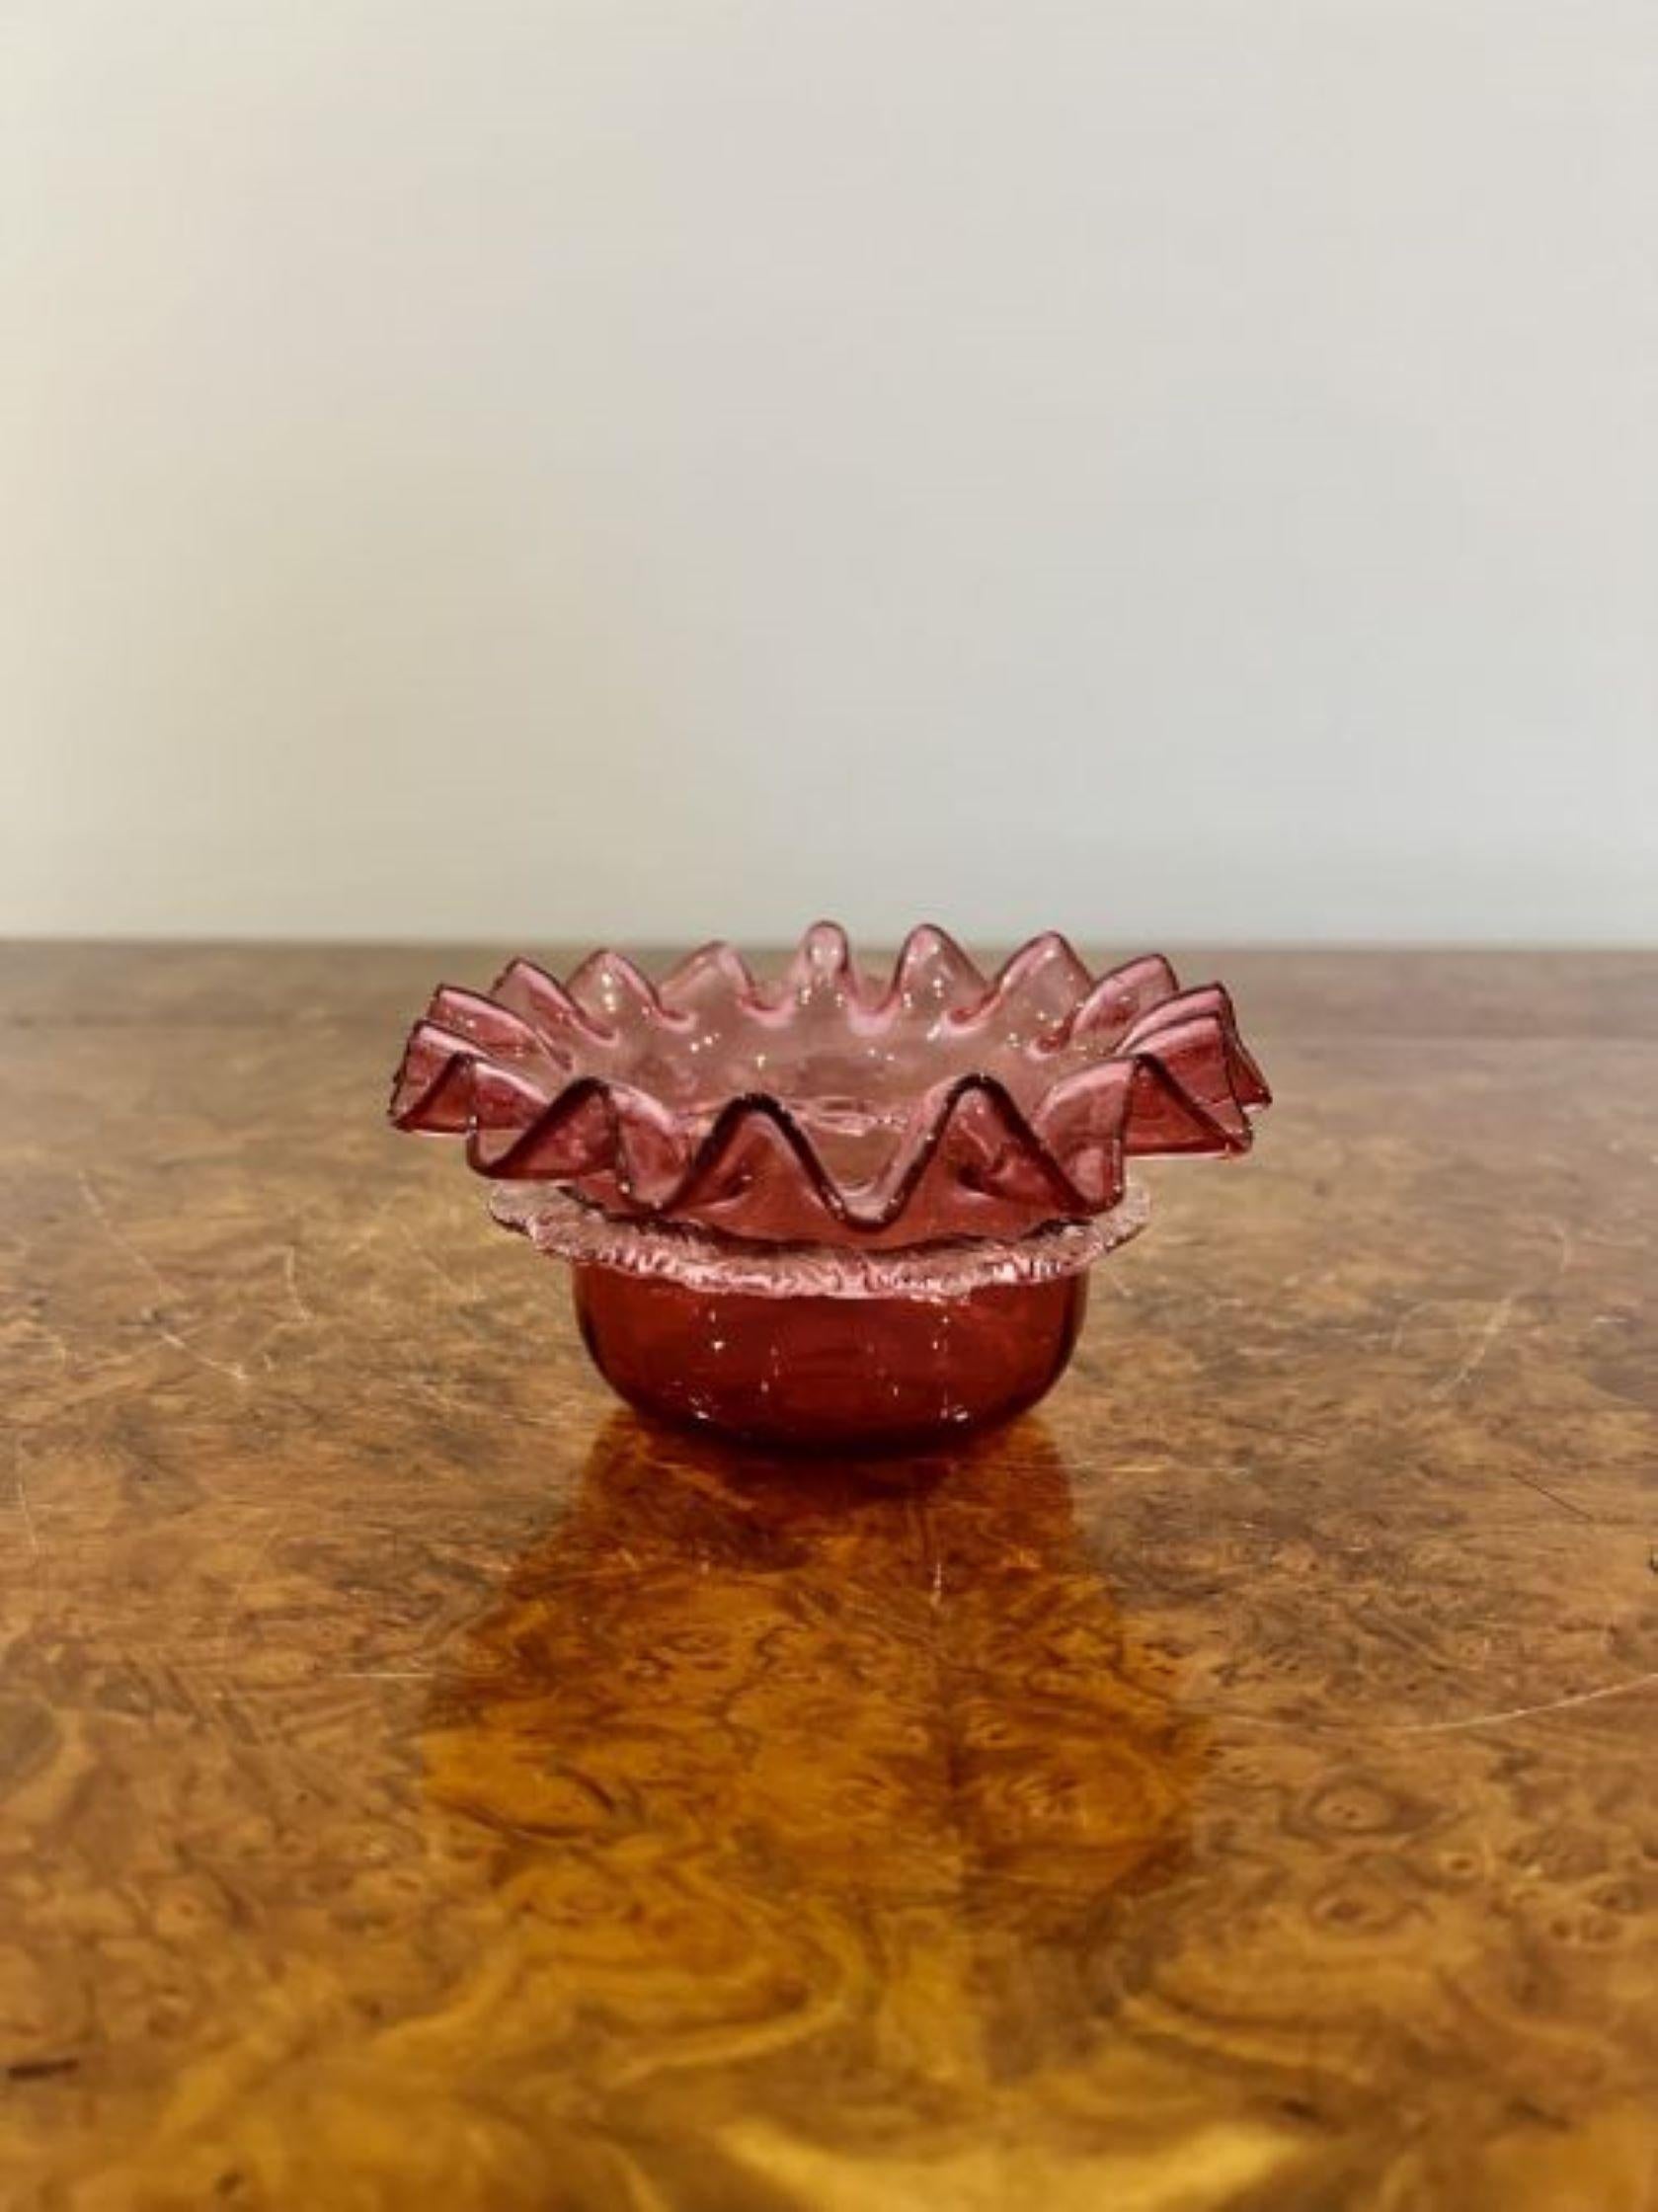 Small Victorian quality cranberry glass bowl. Original Cranberry glass bowl with a lovely shaped top